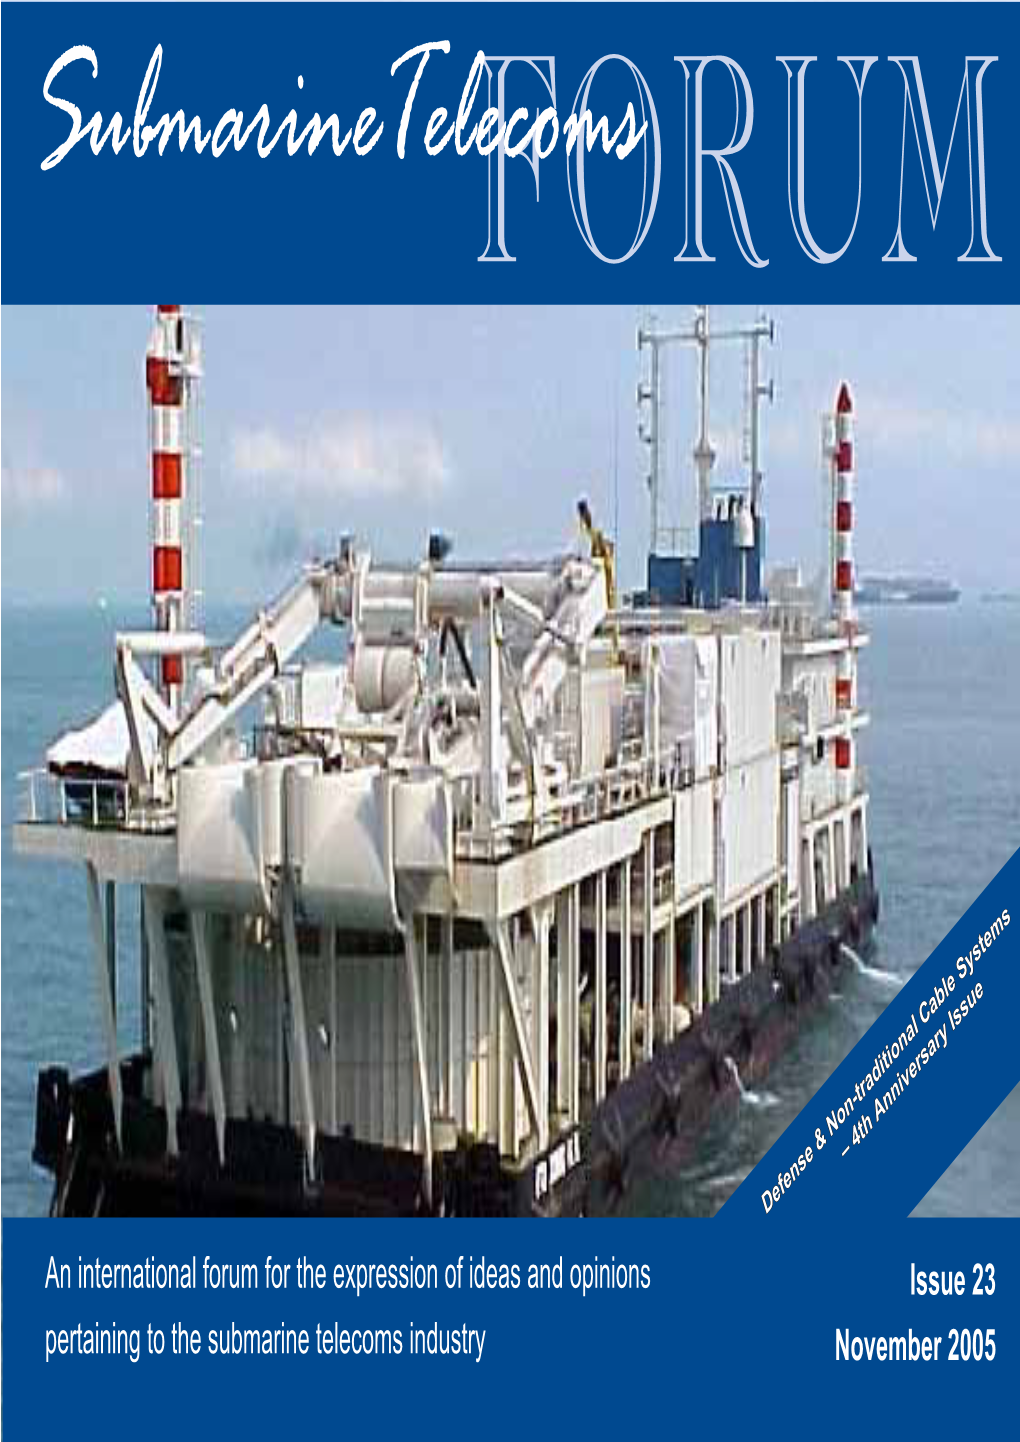 Issue 23 November 2005 1 Submarine Telecoms Forum Is Published Bi-Monthly by WFN Strategies, L.L.C